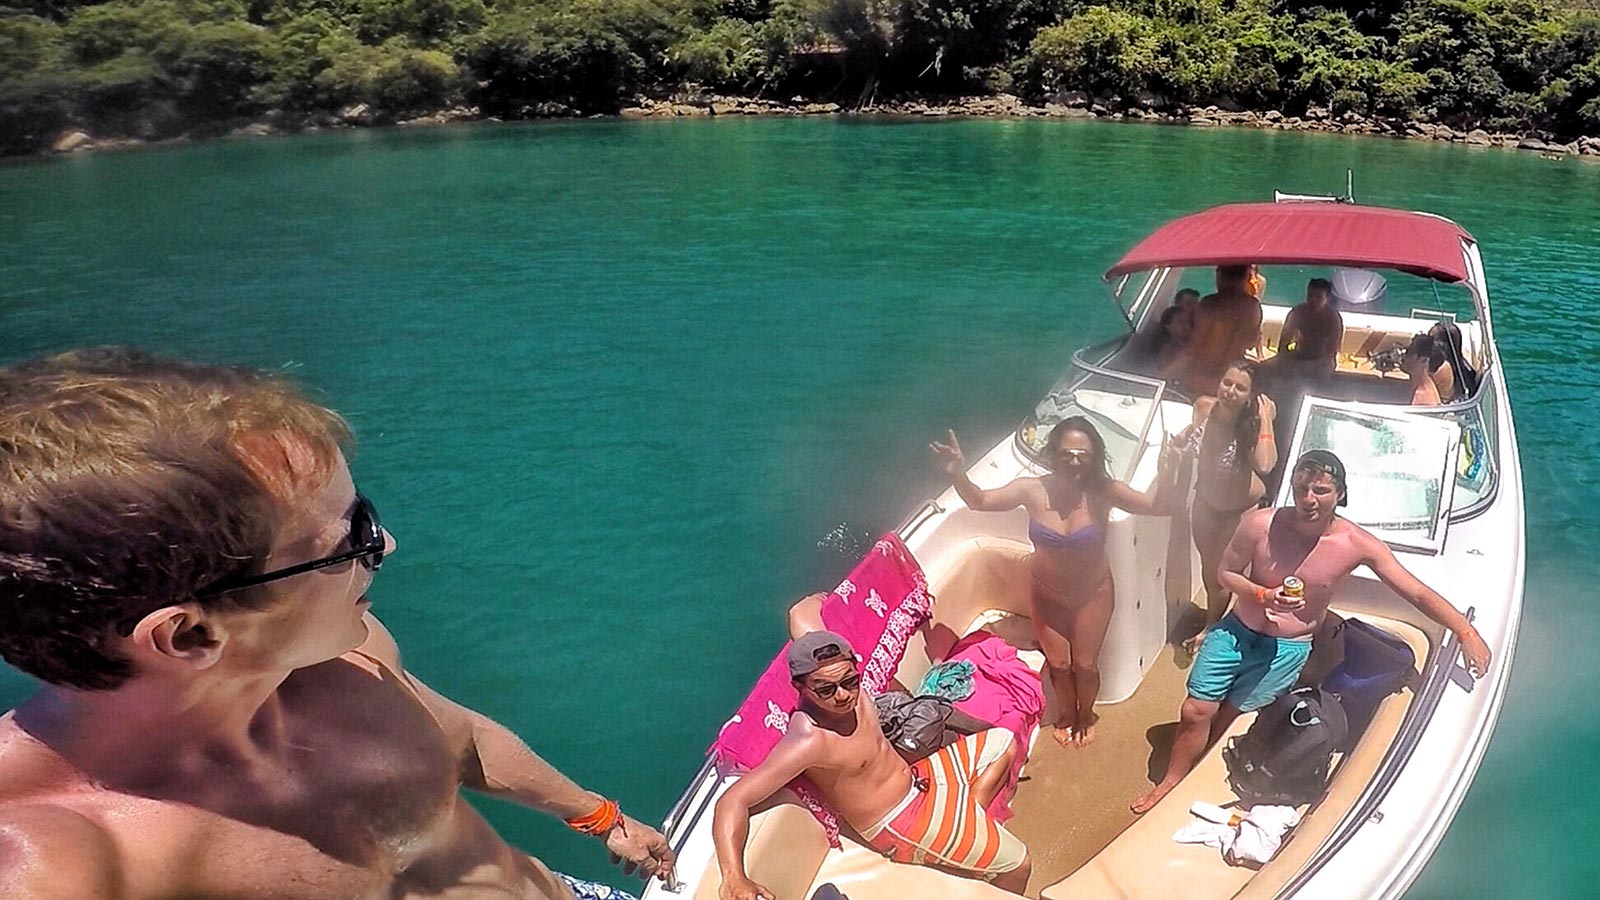 David Simpson and friends at speedboat tour in Ilha Grande, Brazil. Ilha Grande cures the hangover from hell